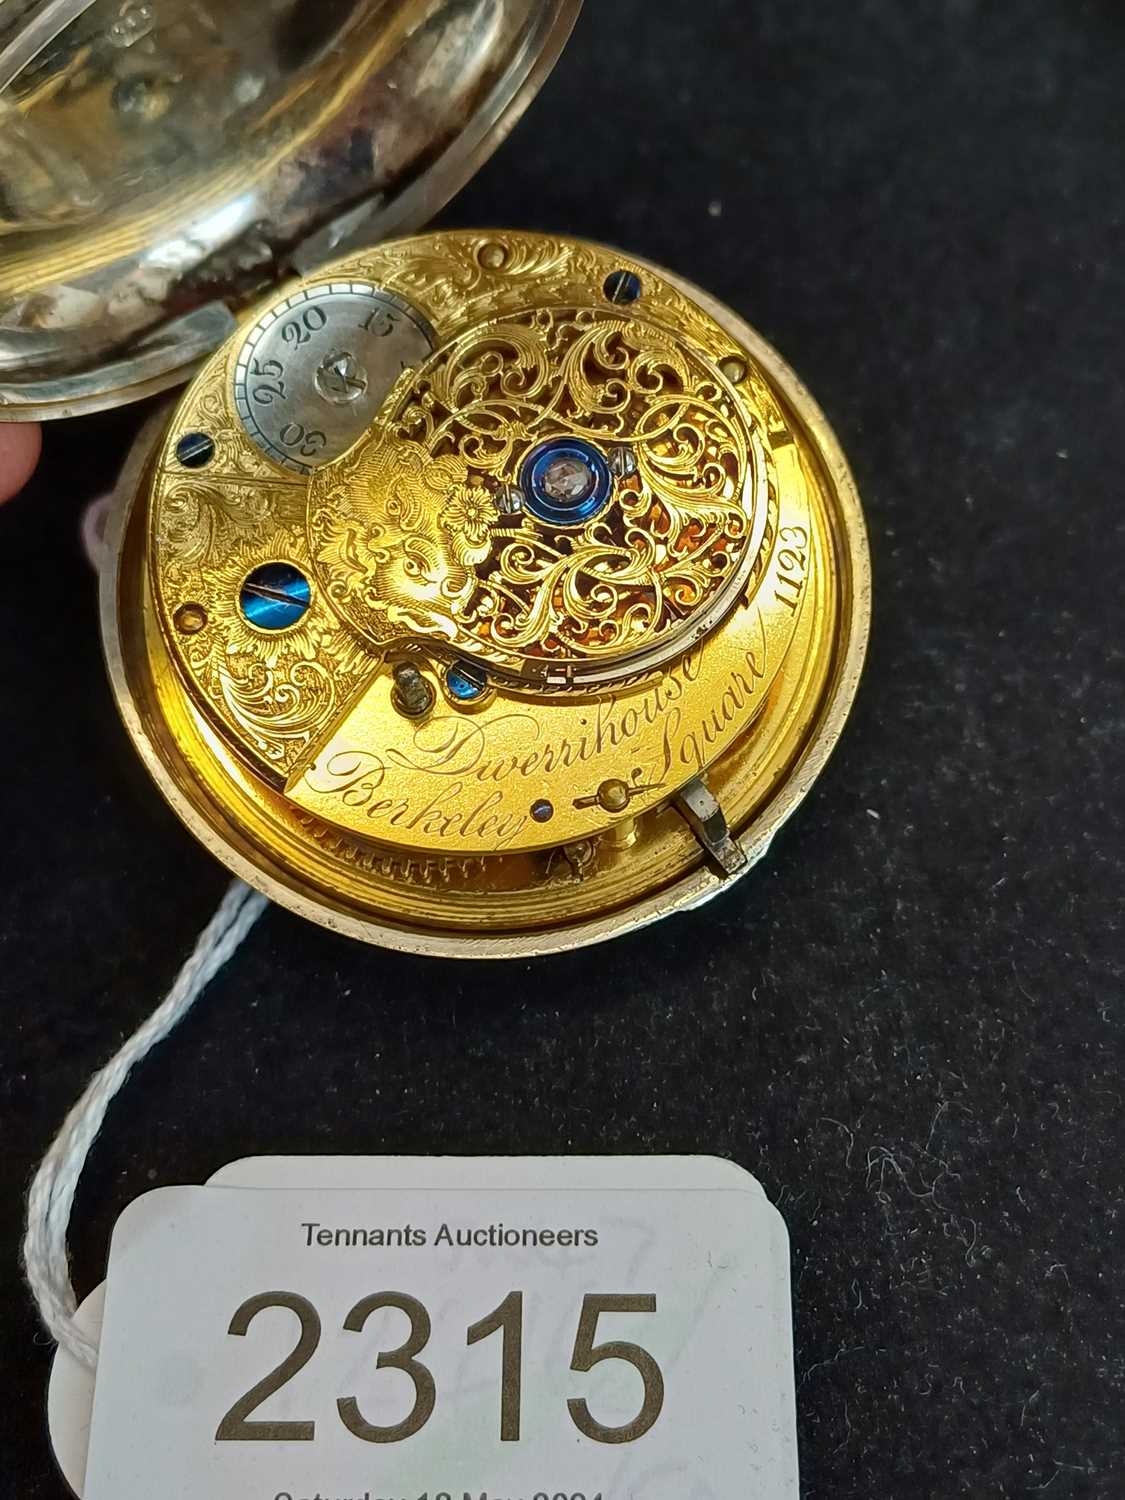 Dwerrihouse: A Silver Pair Cased Verge Pocket Watch, signed Dwerrihouse, Berkeley Square, 1815, - Image 3 of 3